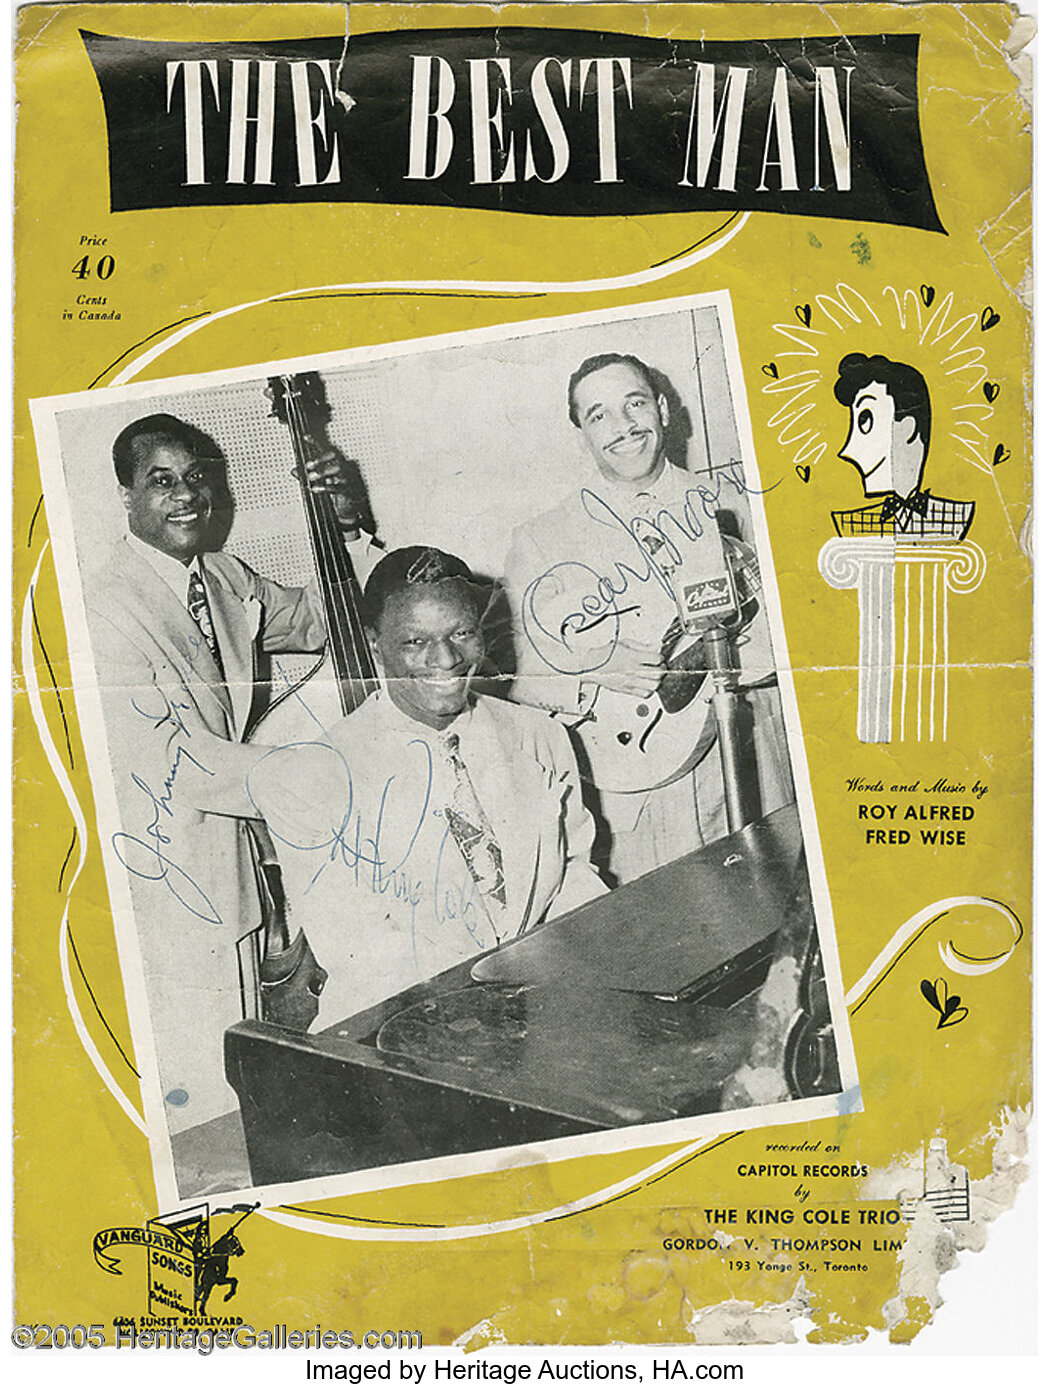 King Cole Trio Signed Sheet Music. For the song 